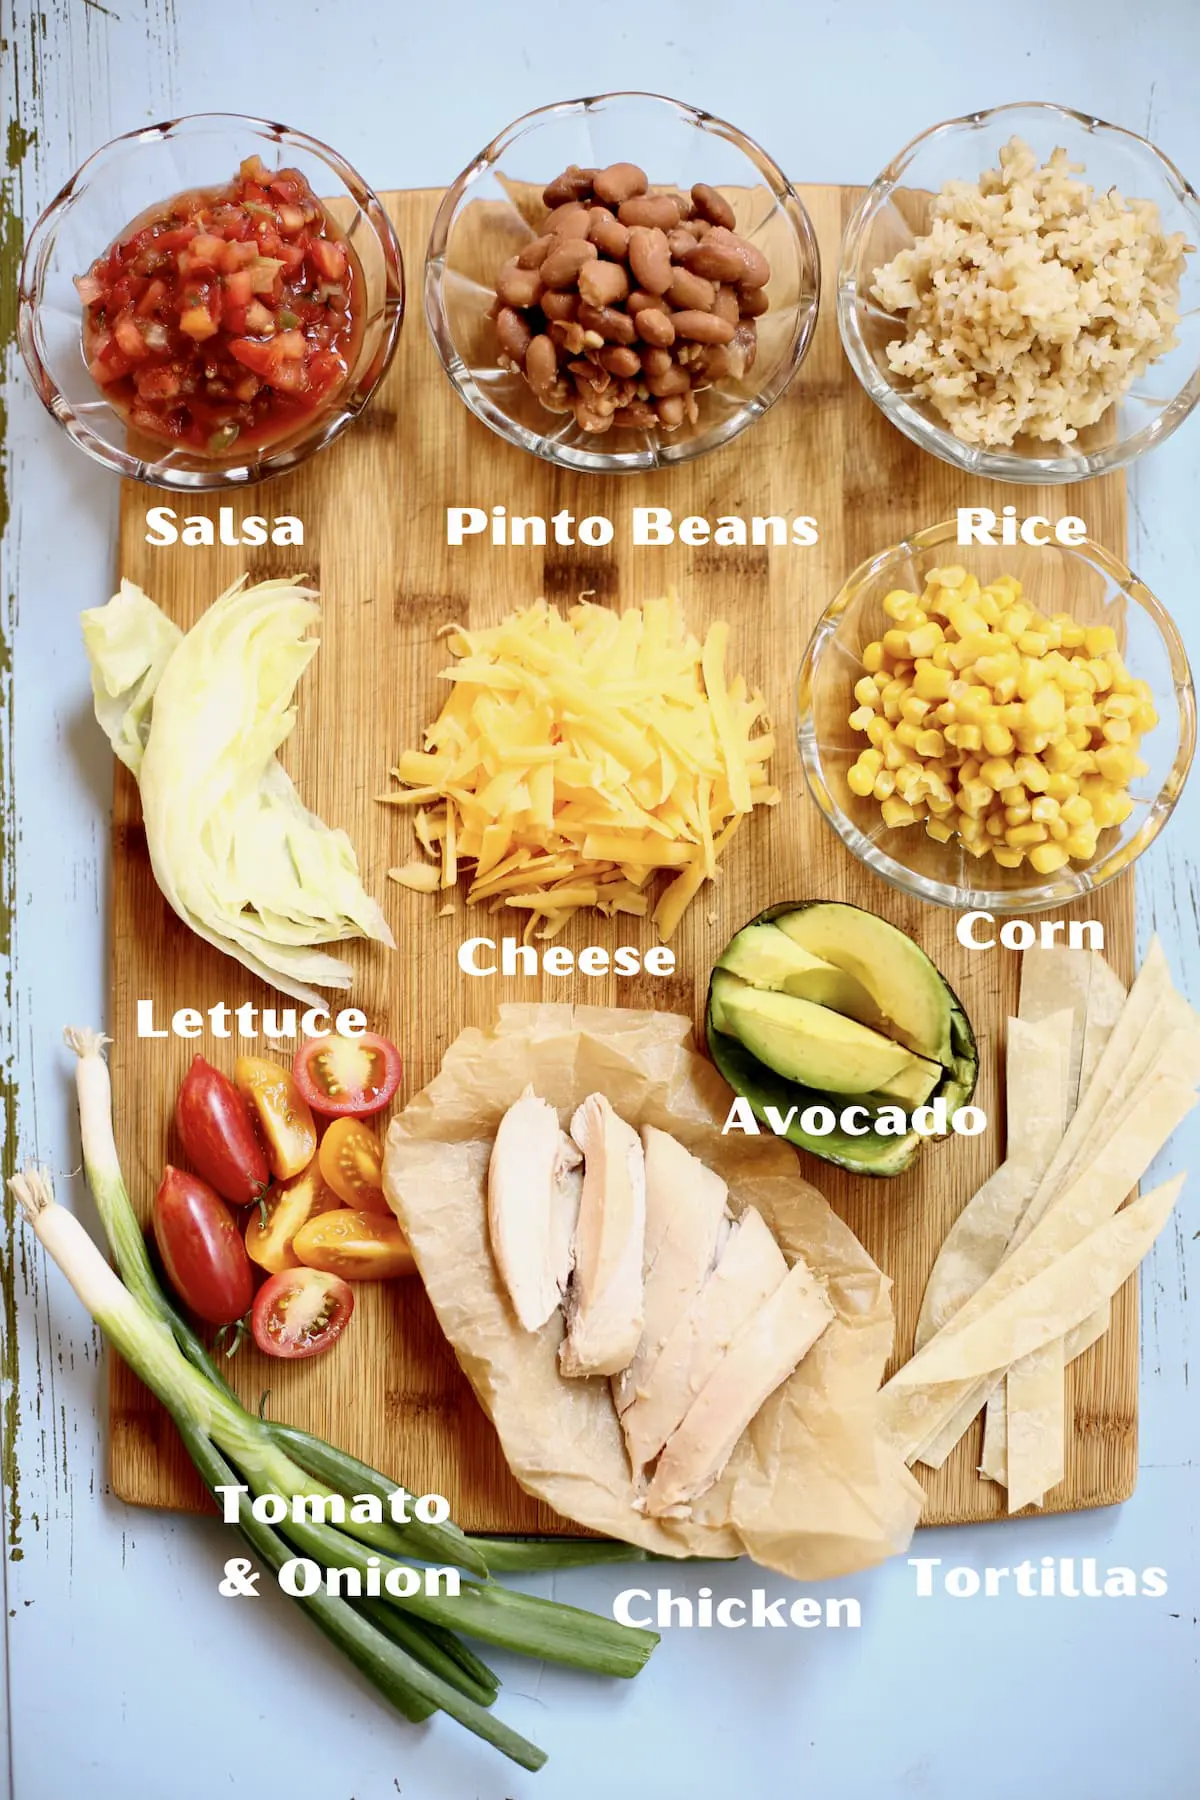 a cutting board of prepped ingredients for a meal,each one marked with text